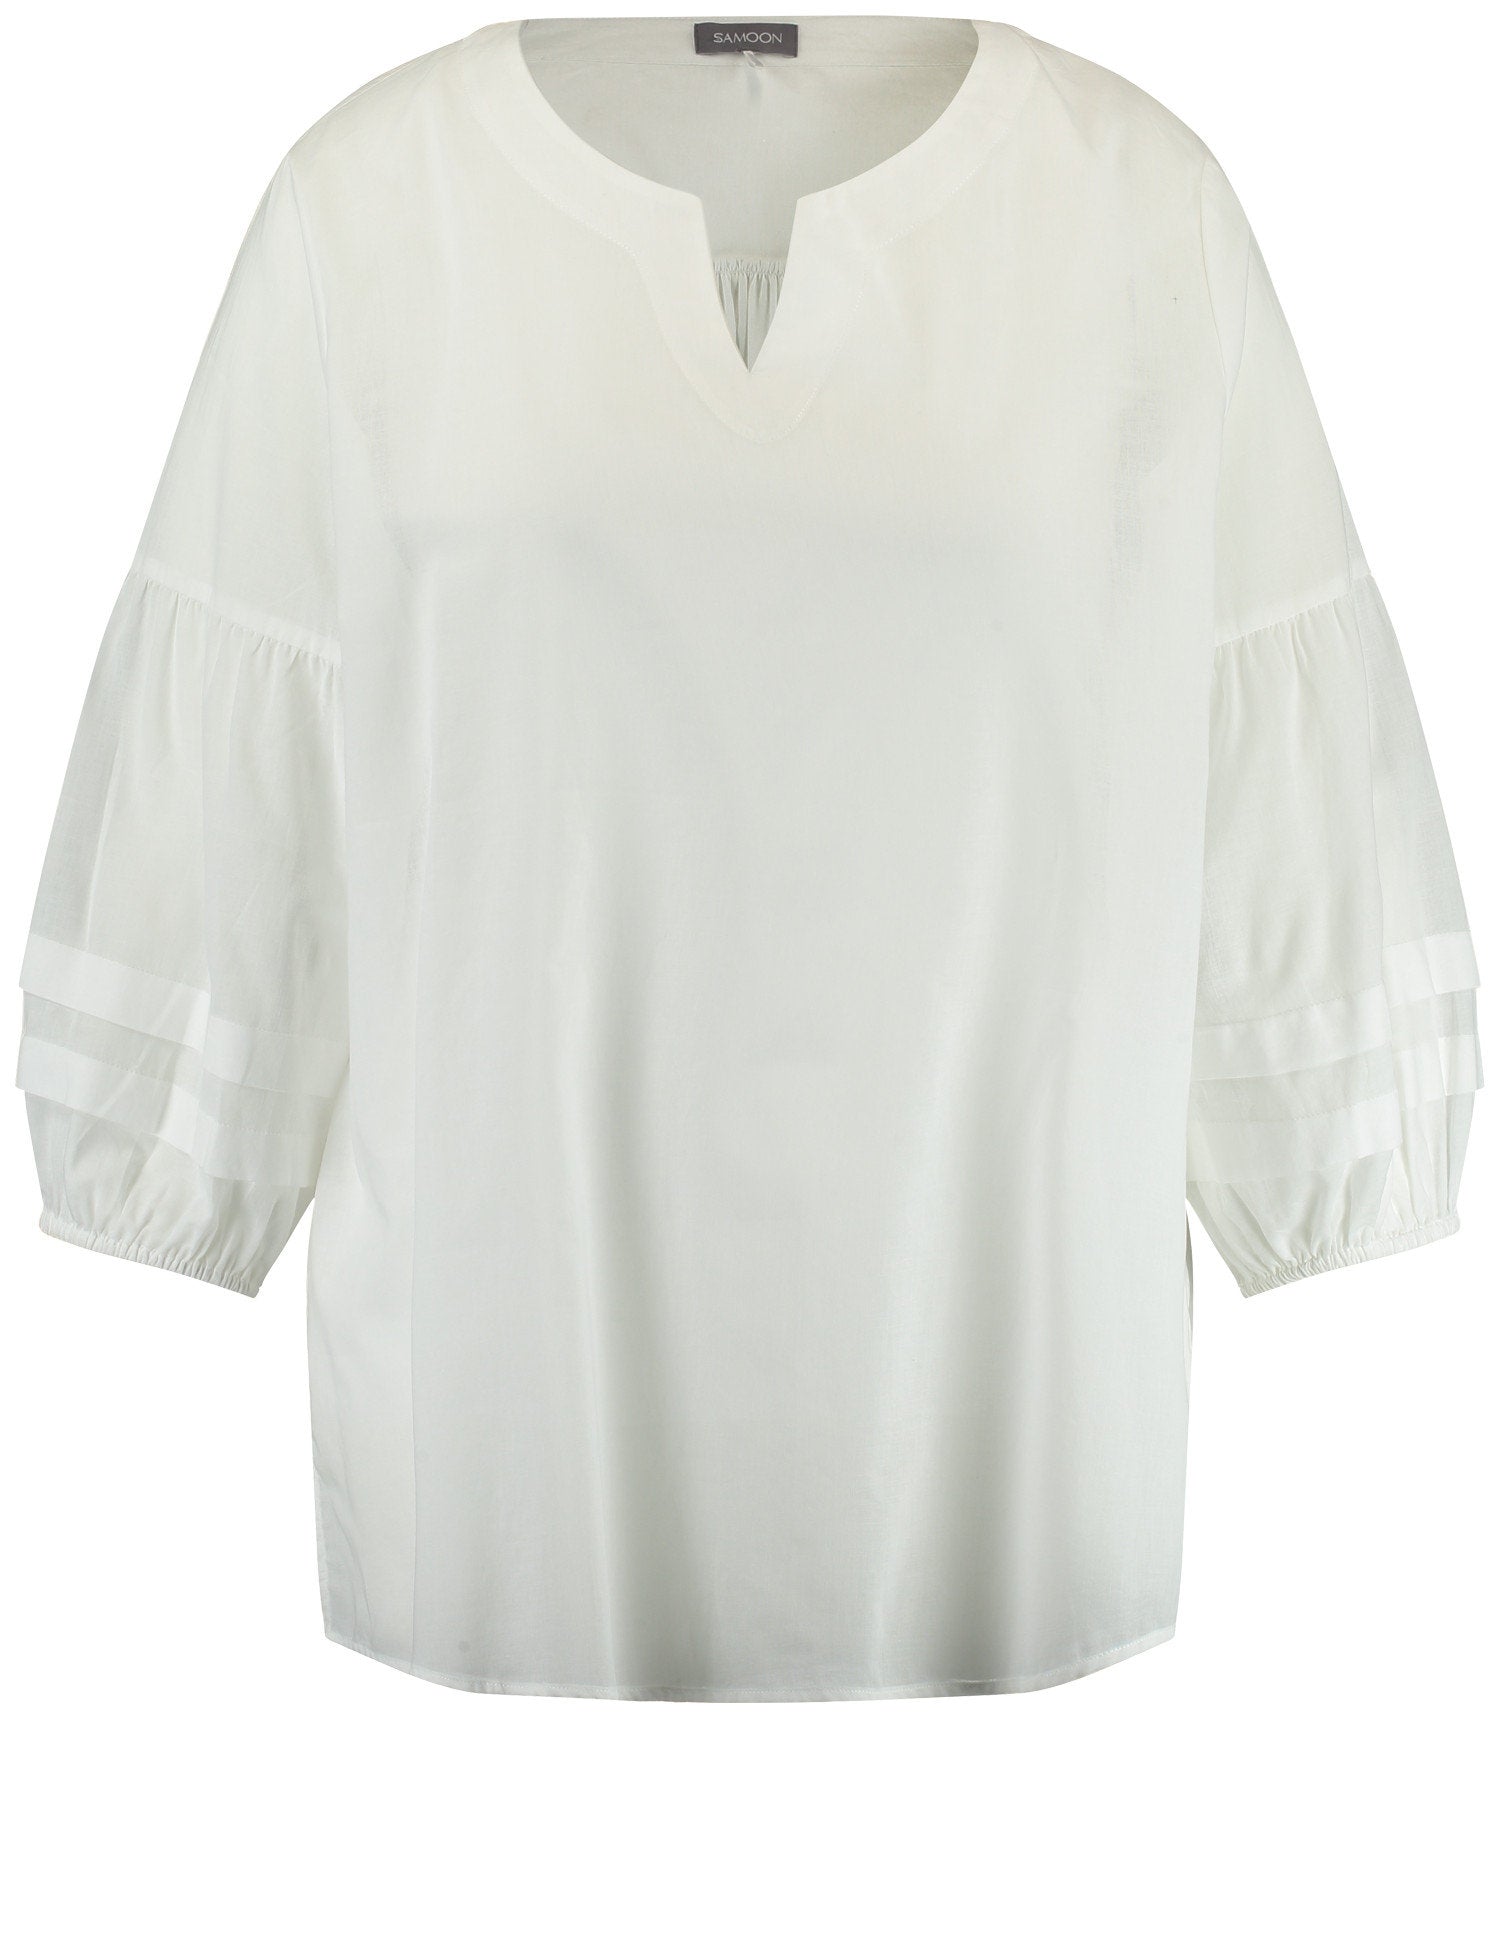 Lightweight Cotton Blouse With Balloon Sleeves_460031-21059_9600_01